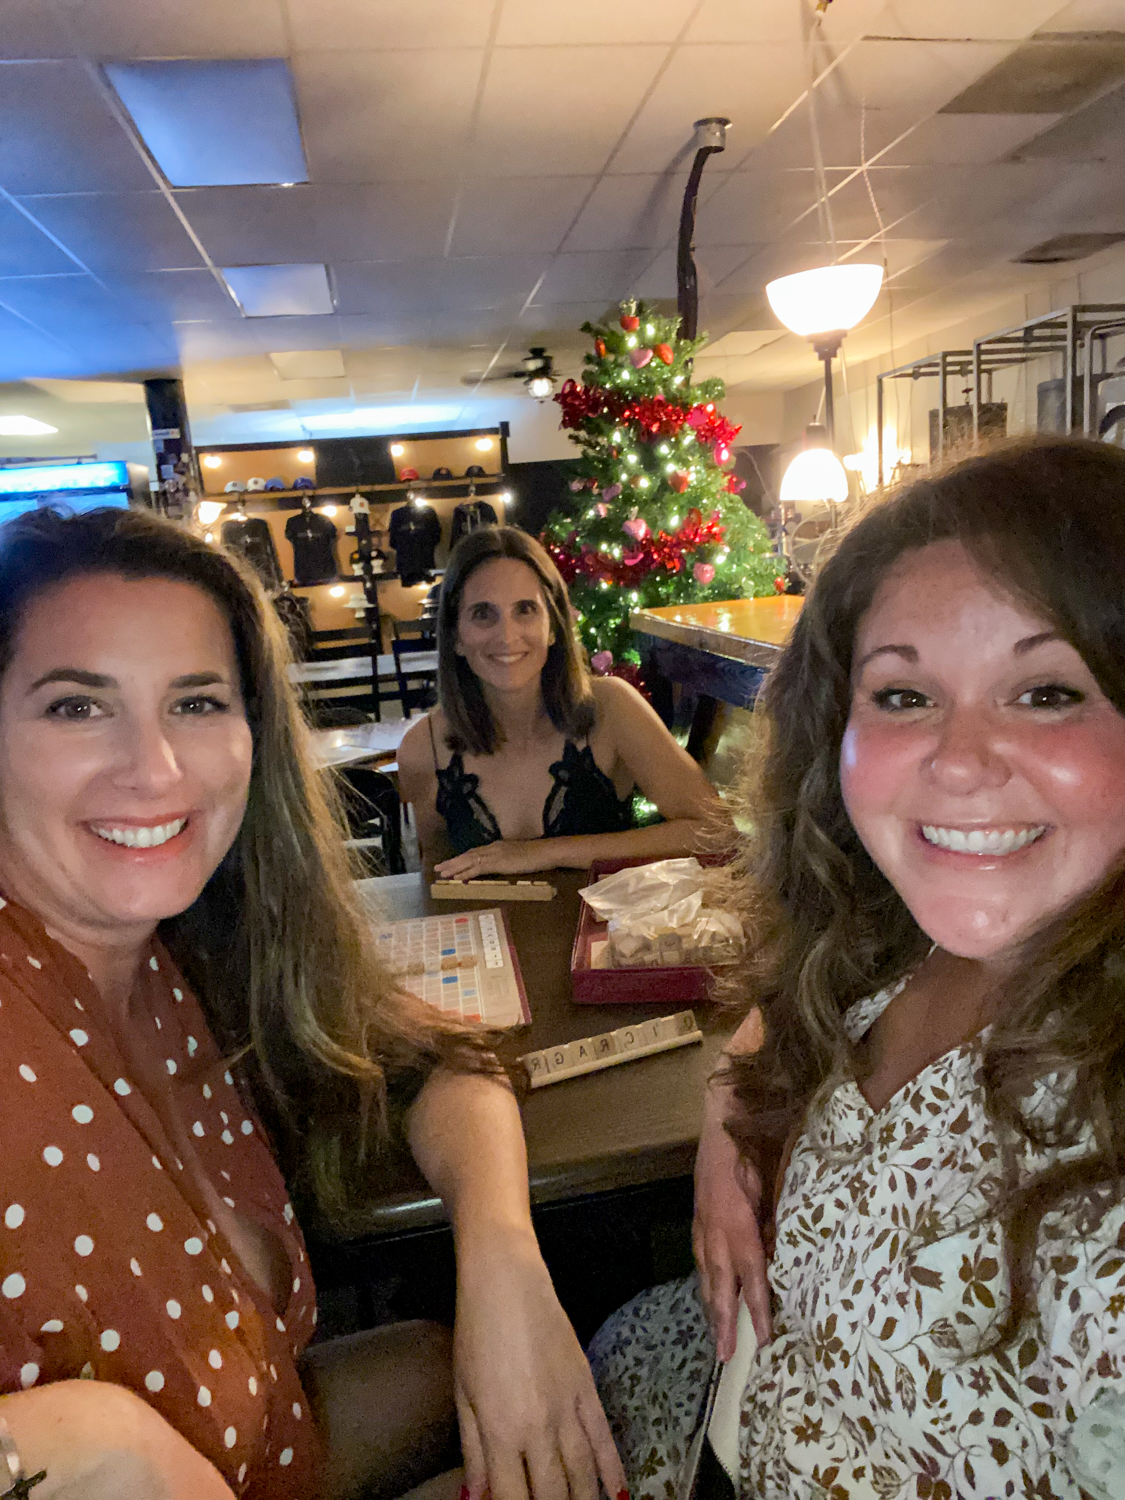 Nine State Brewery restaurant. Travel Tips for A Visit to Inverness FL. A recap of where we stayed, fun outdoor activities to try, and delicious restaurants for a small-town girls' trip!